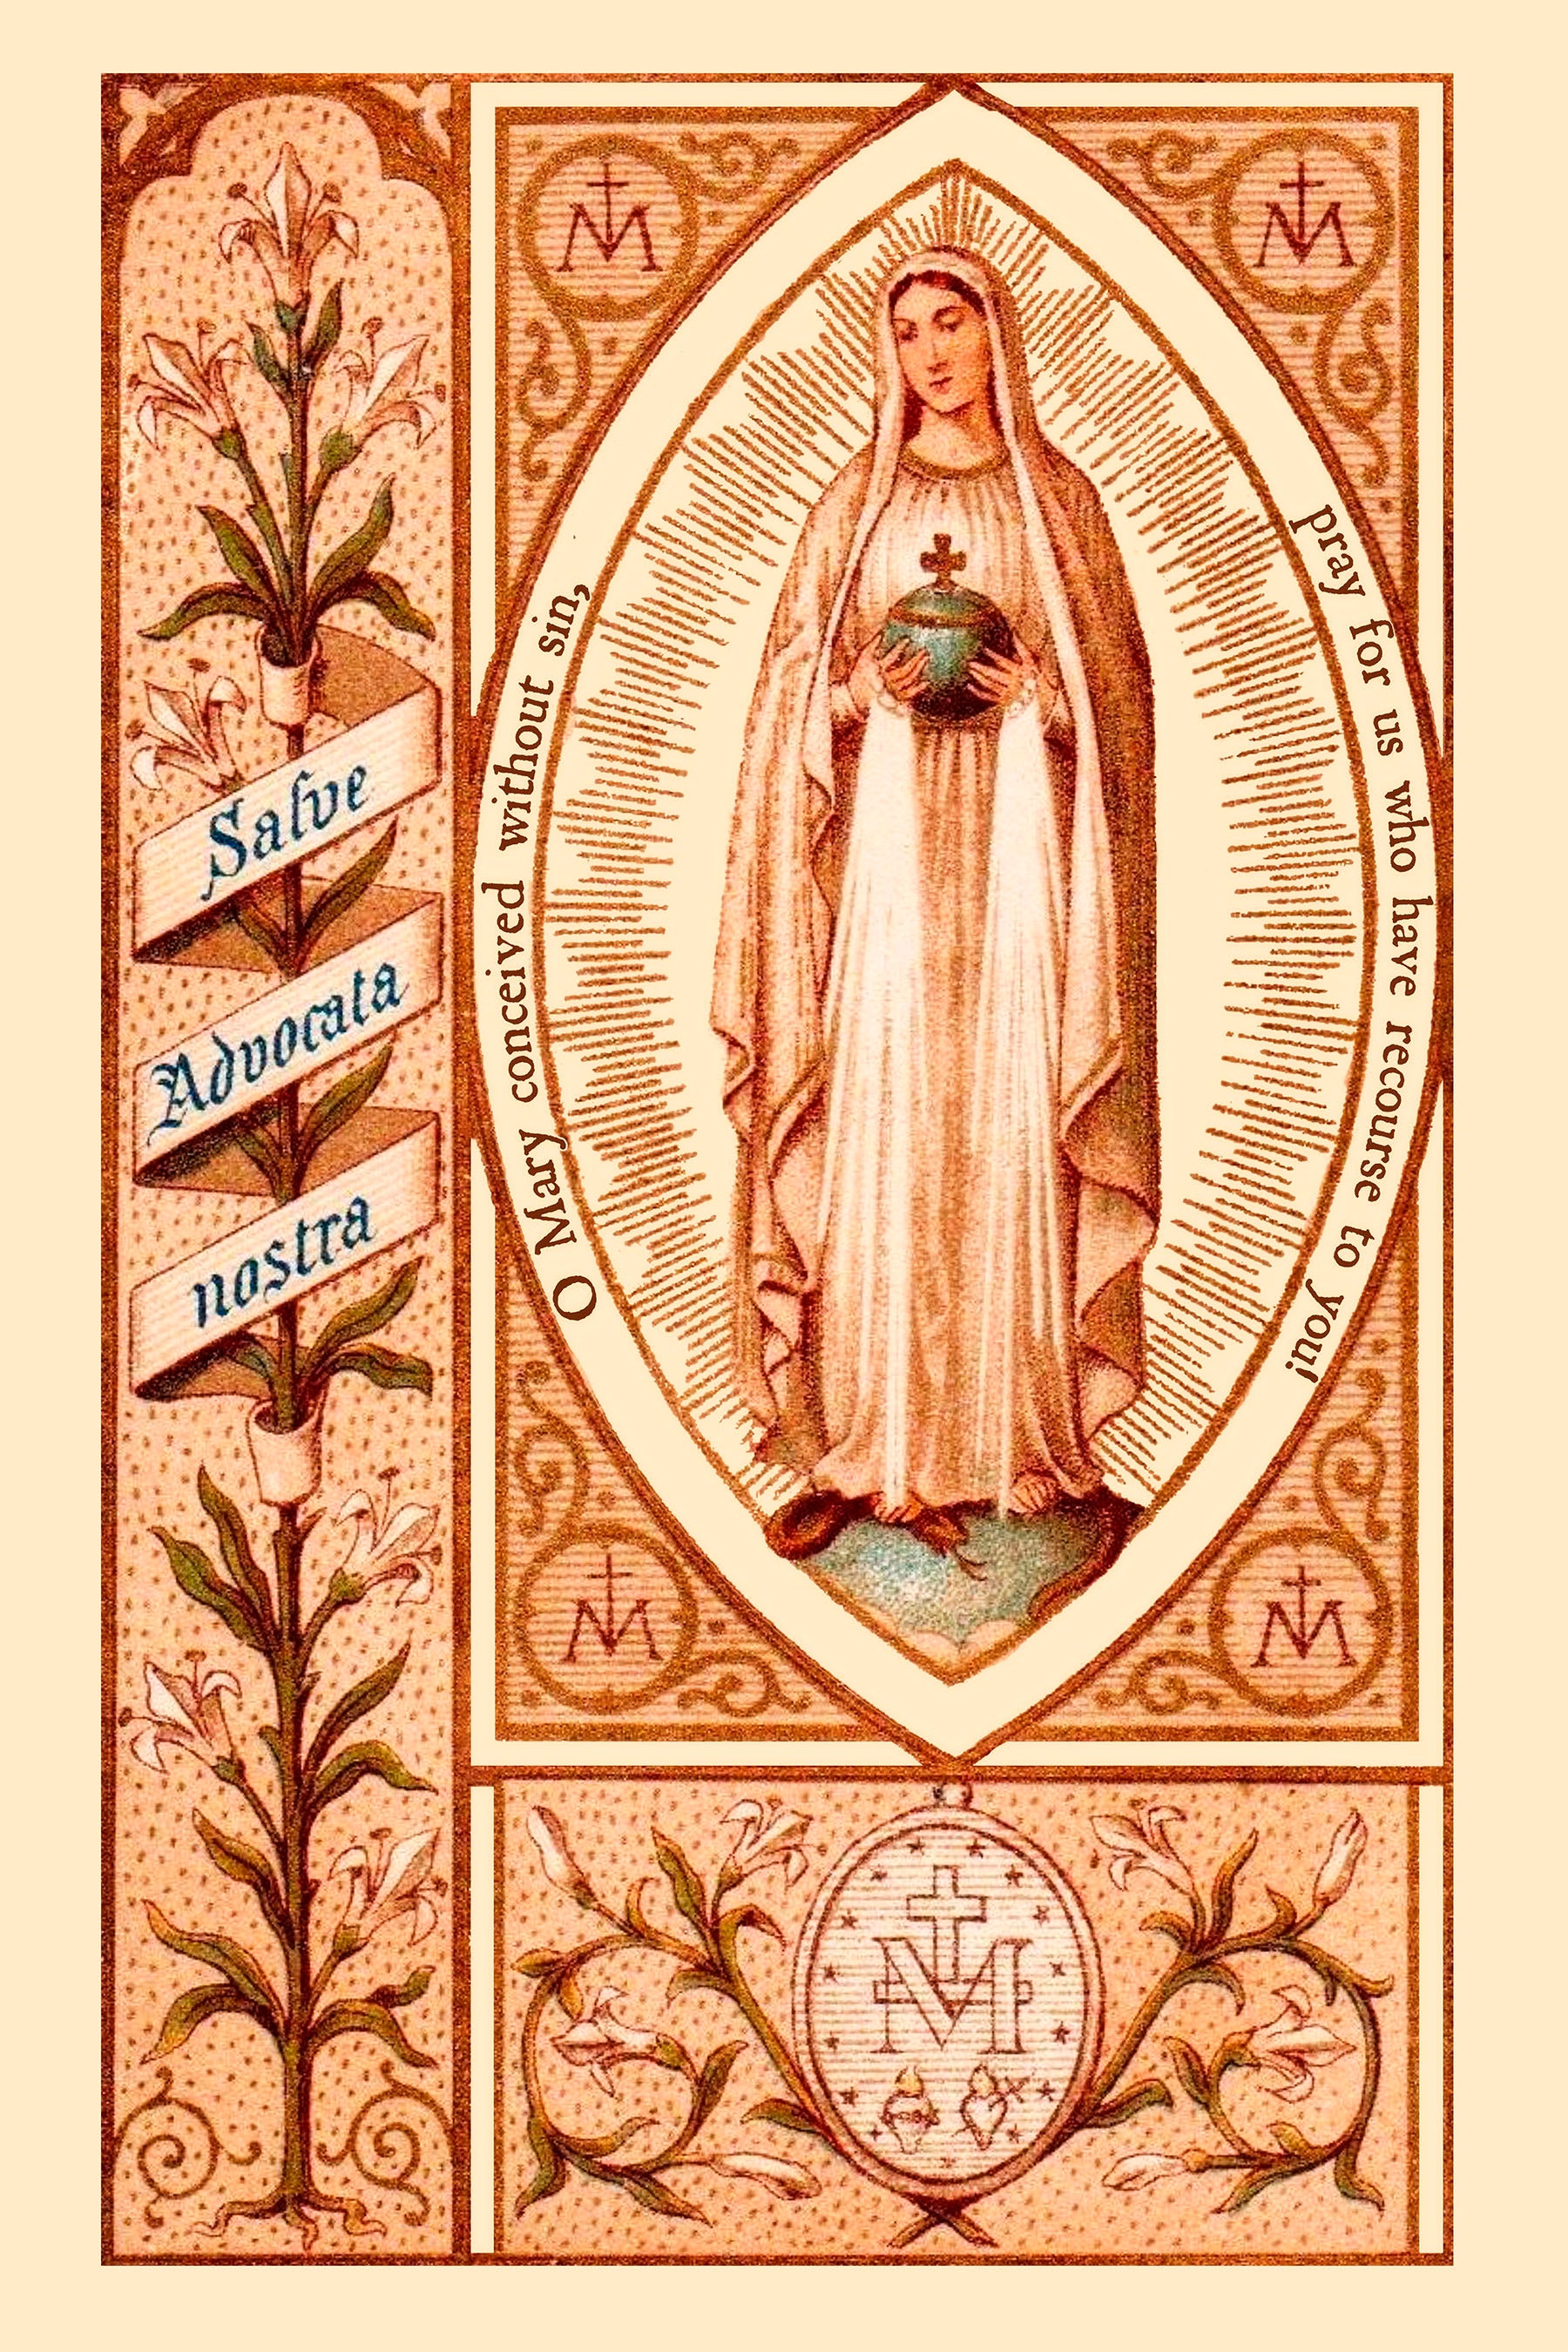 Blessed Virgin Mary "Hail our advocate" Poster 12"x18"